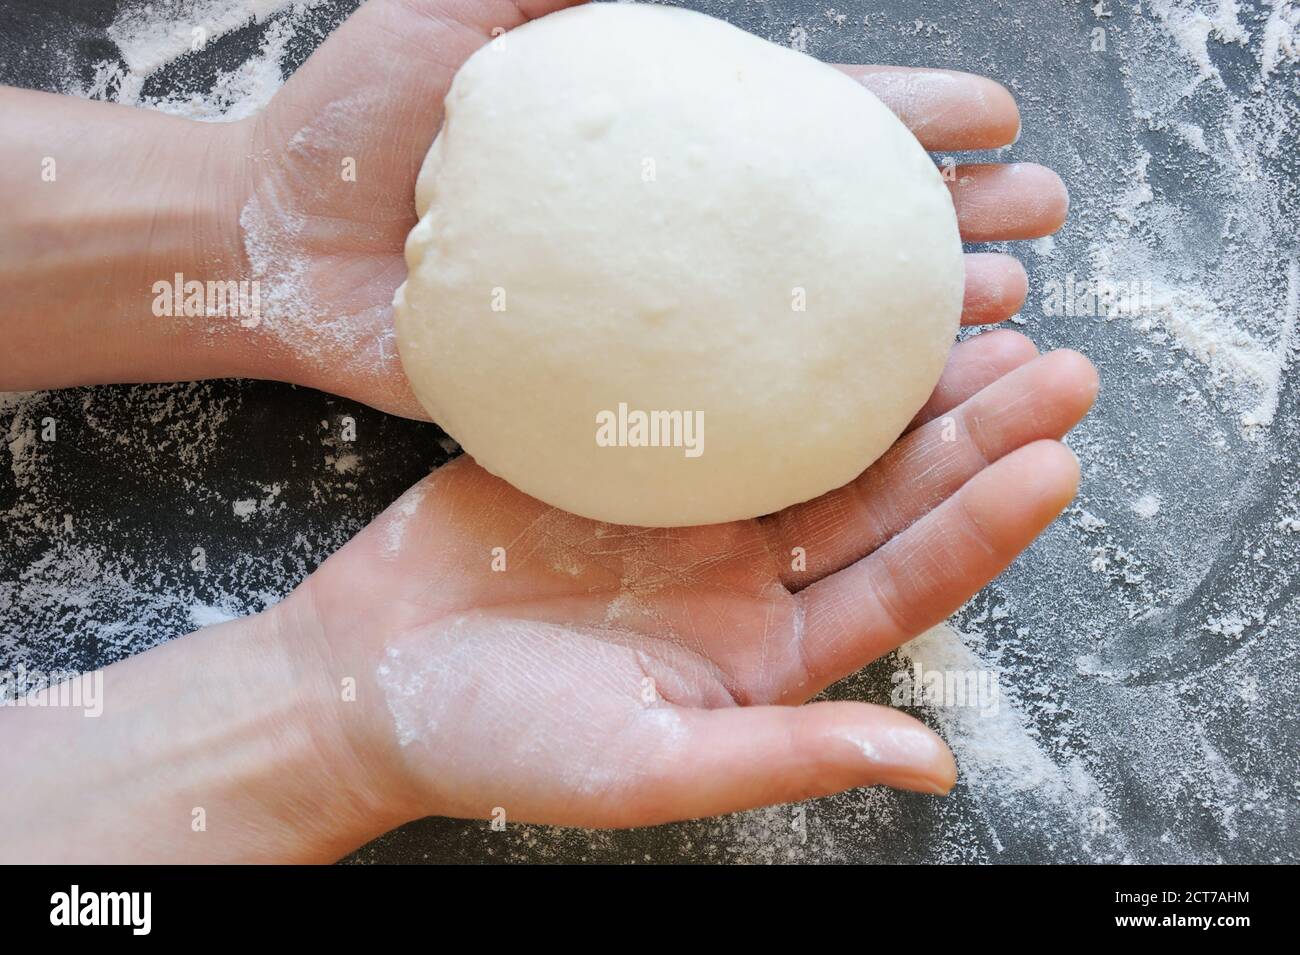 Hands holding a ball of dough over floured background. Dough ready to prepare a delicious homemade meal. Horizontal orientation. Stock Photo